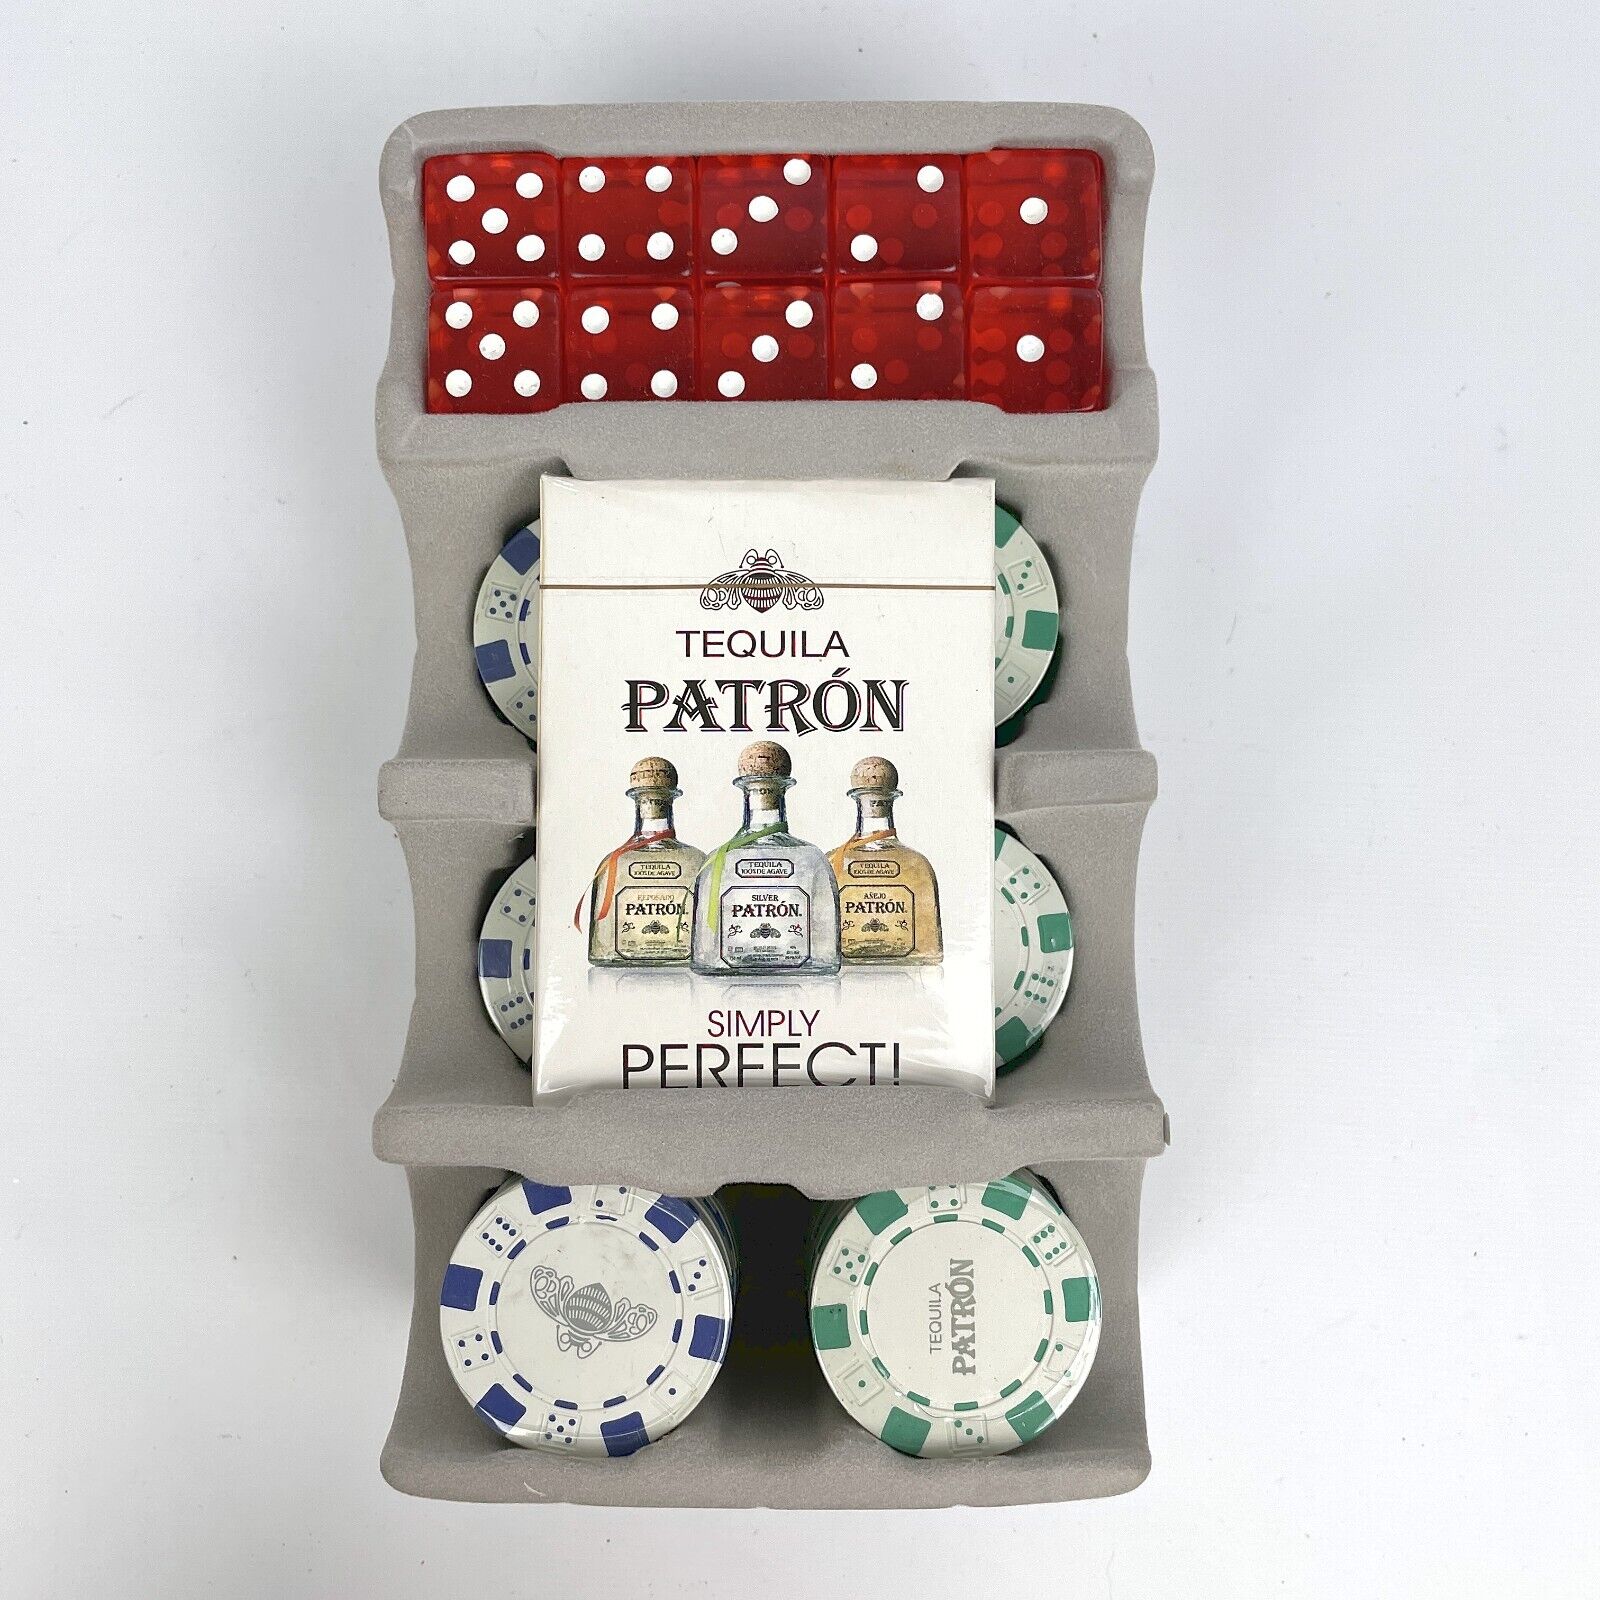 Complete Patron Tequila Poker Set  96 Heavy Clay Chips 10 Dice & Sealed Cards